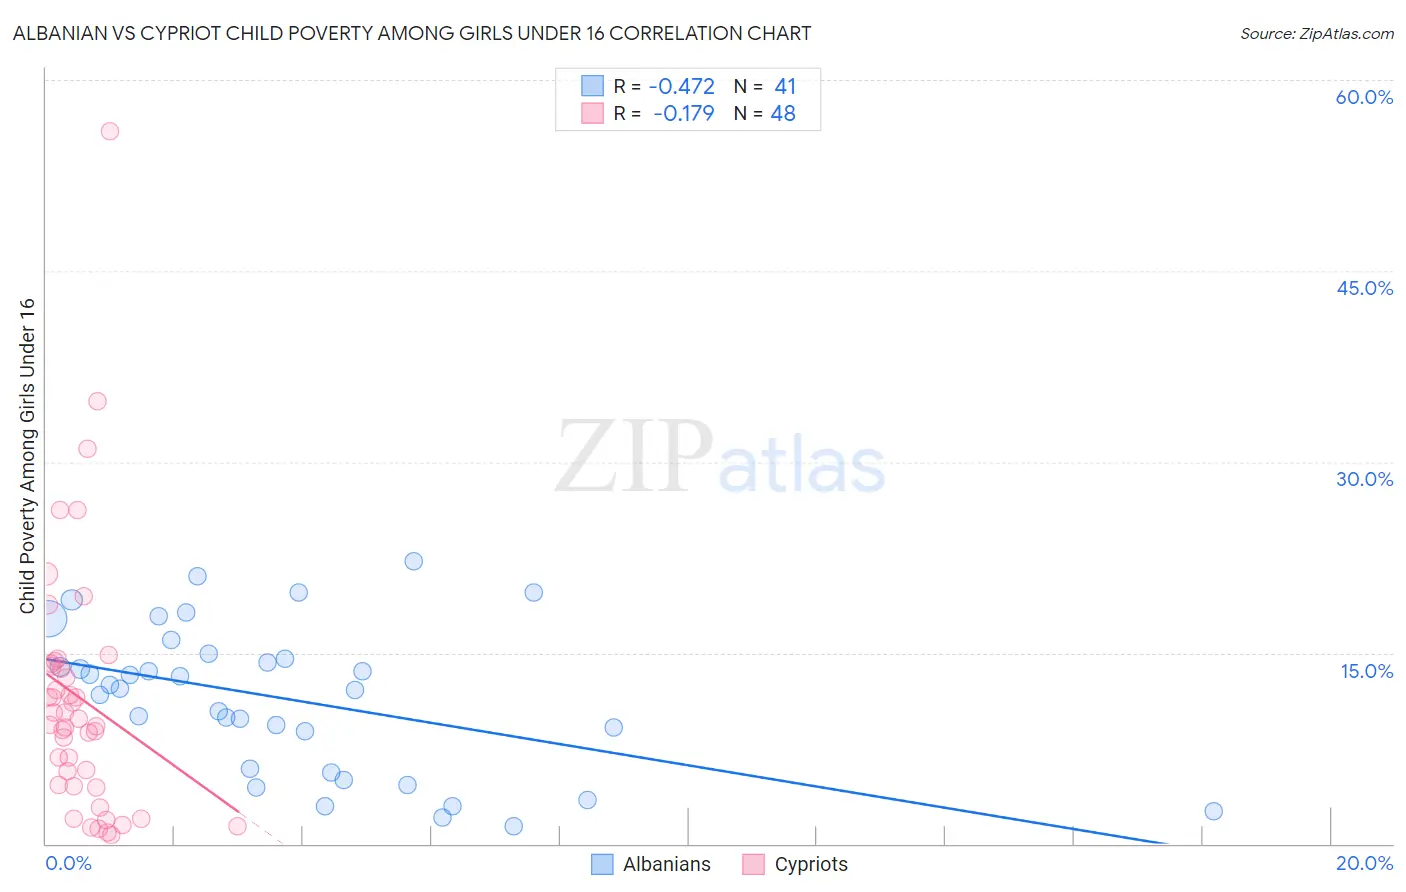 Albanian vs Cypriot Child Poverty Among Girls Under 16